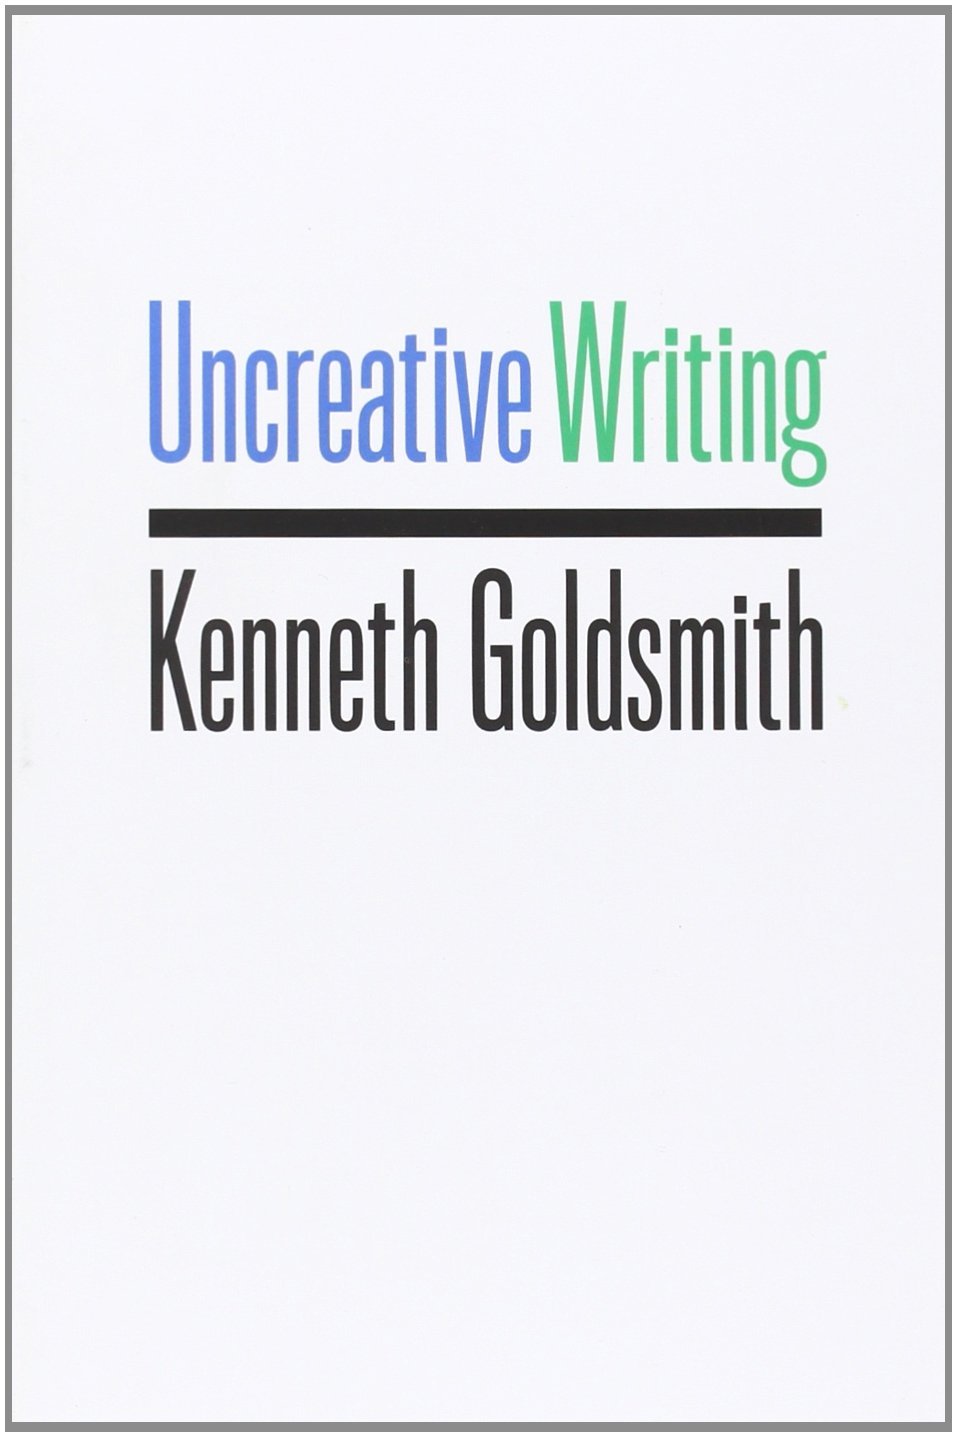 Kenneth Goldsmith, Uncreative Writing
It’s funny to think about how outrageous I found Kenny’s ideas at first, and now how unbelievably obvious and level-headed I find them.
Re-reading this, my favorite chapters are “What Writing Can Learn From...